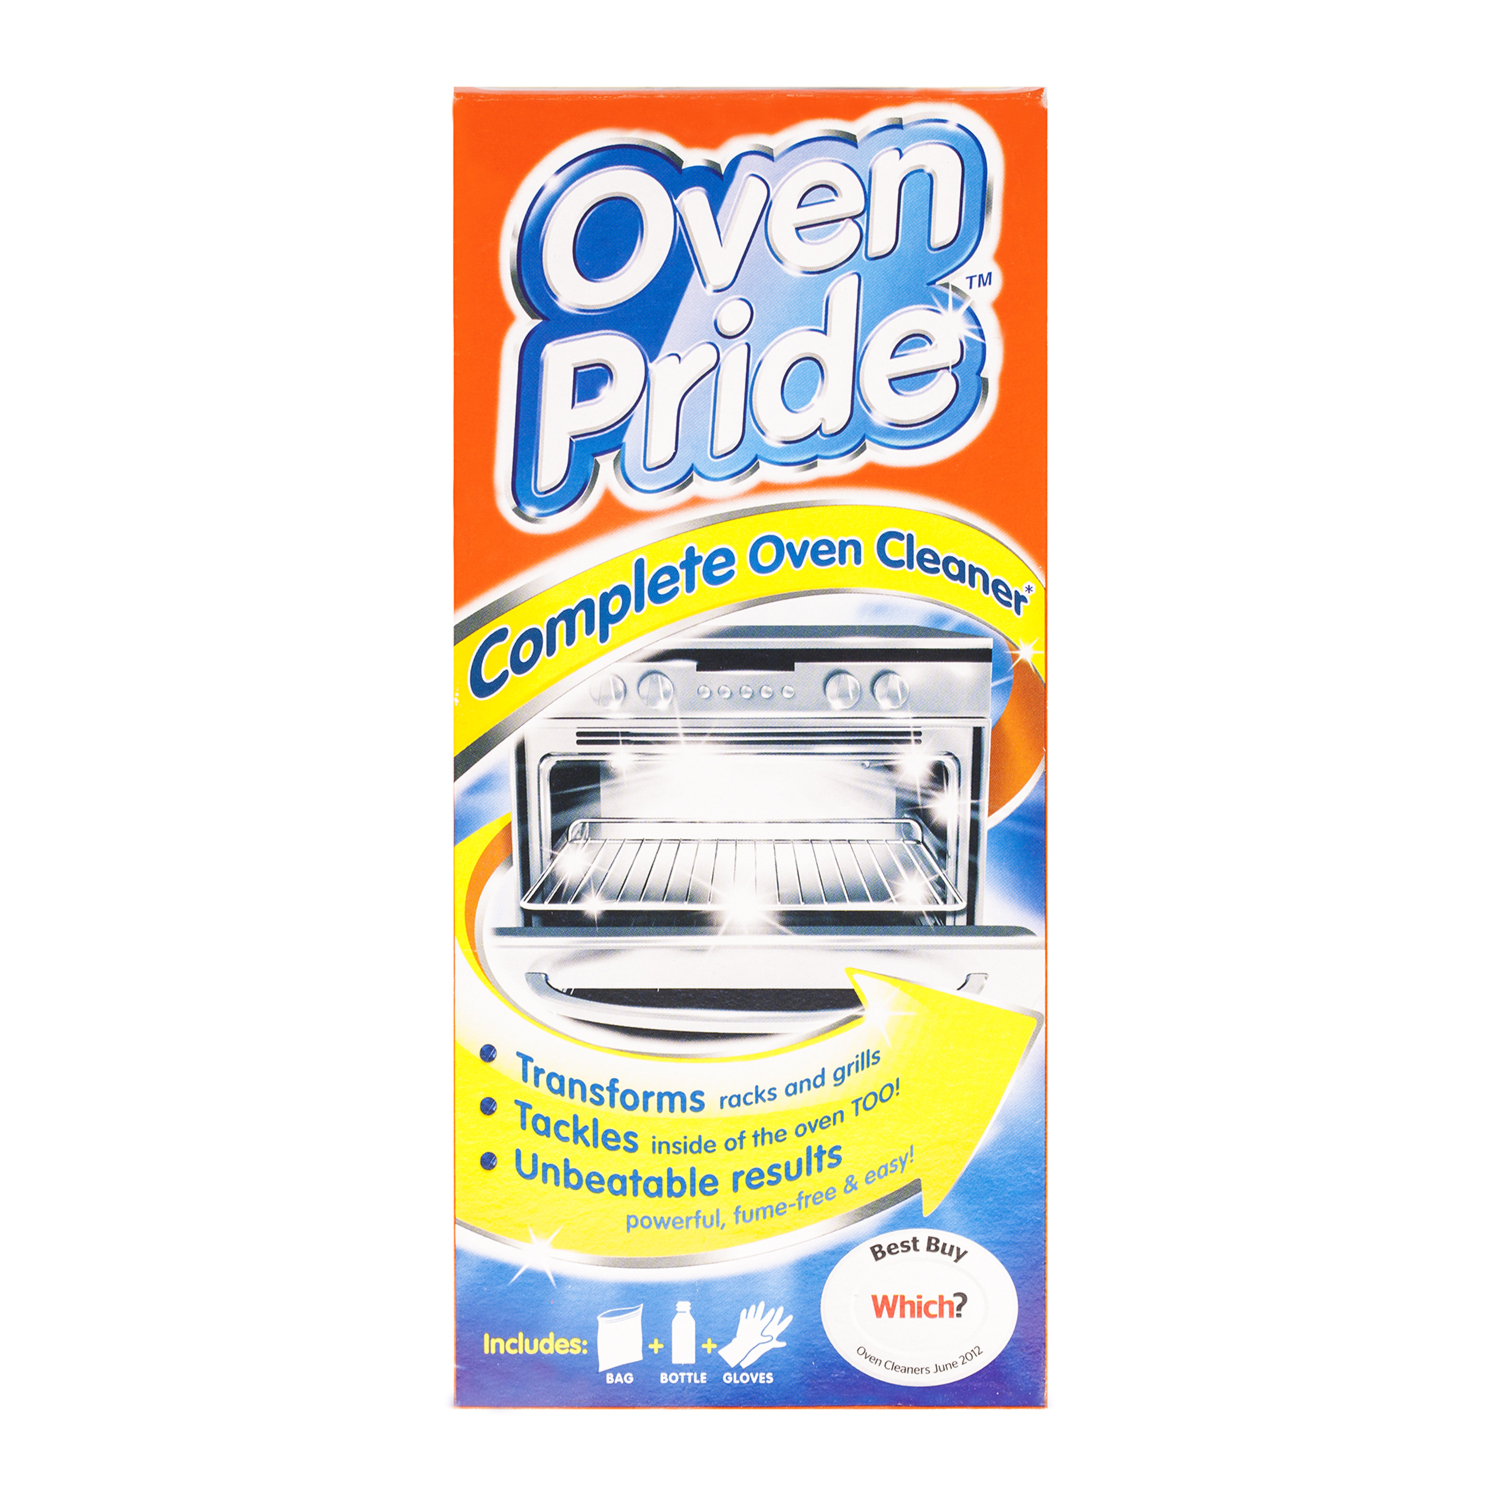 Oven Pride Cleaning System Image